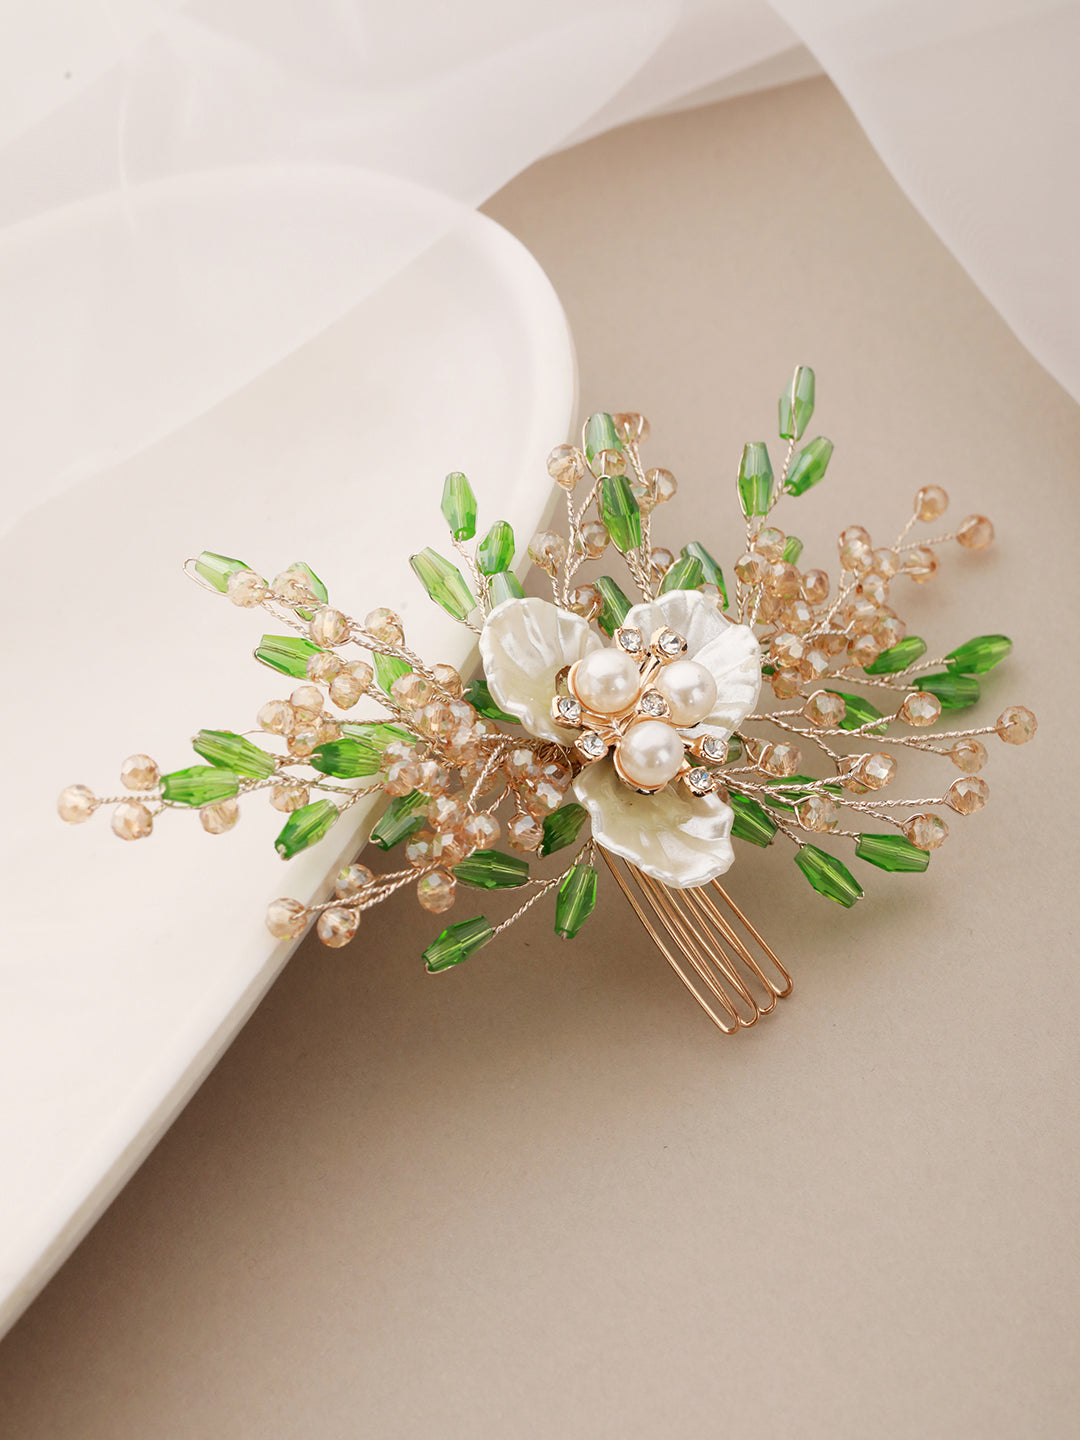 Gold Toned Mother Of Pearl Embellished Green  Hair Comb  Pin